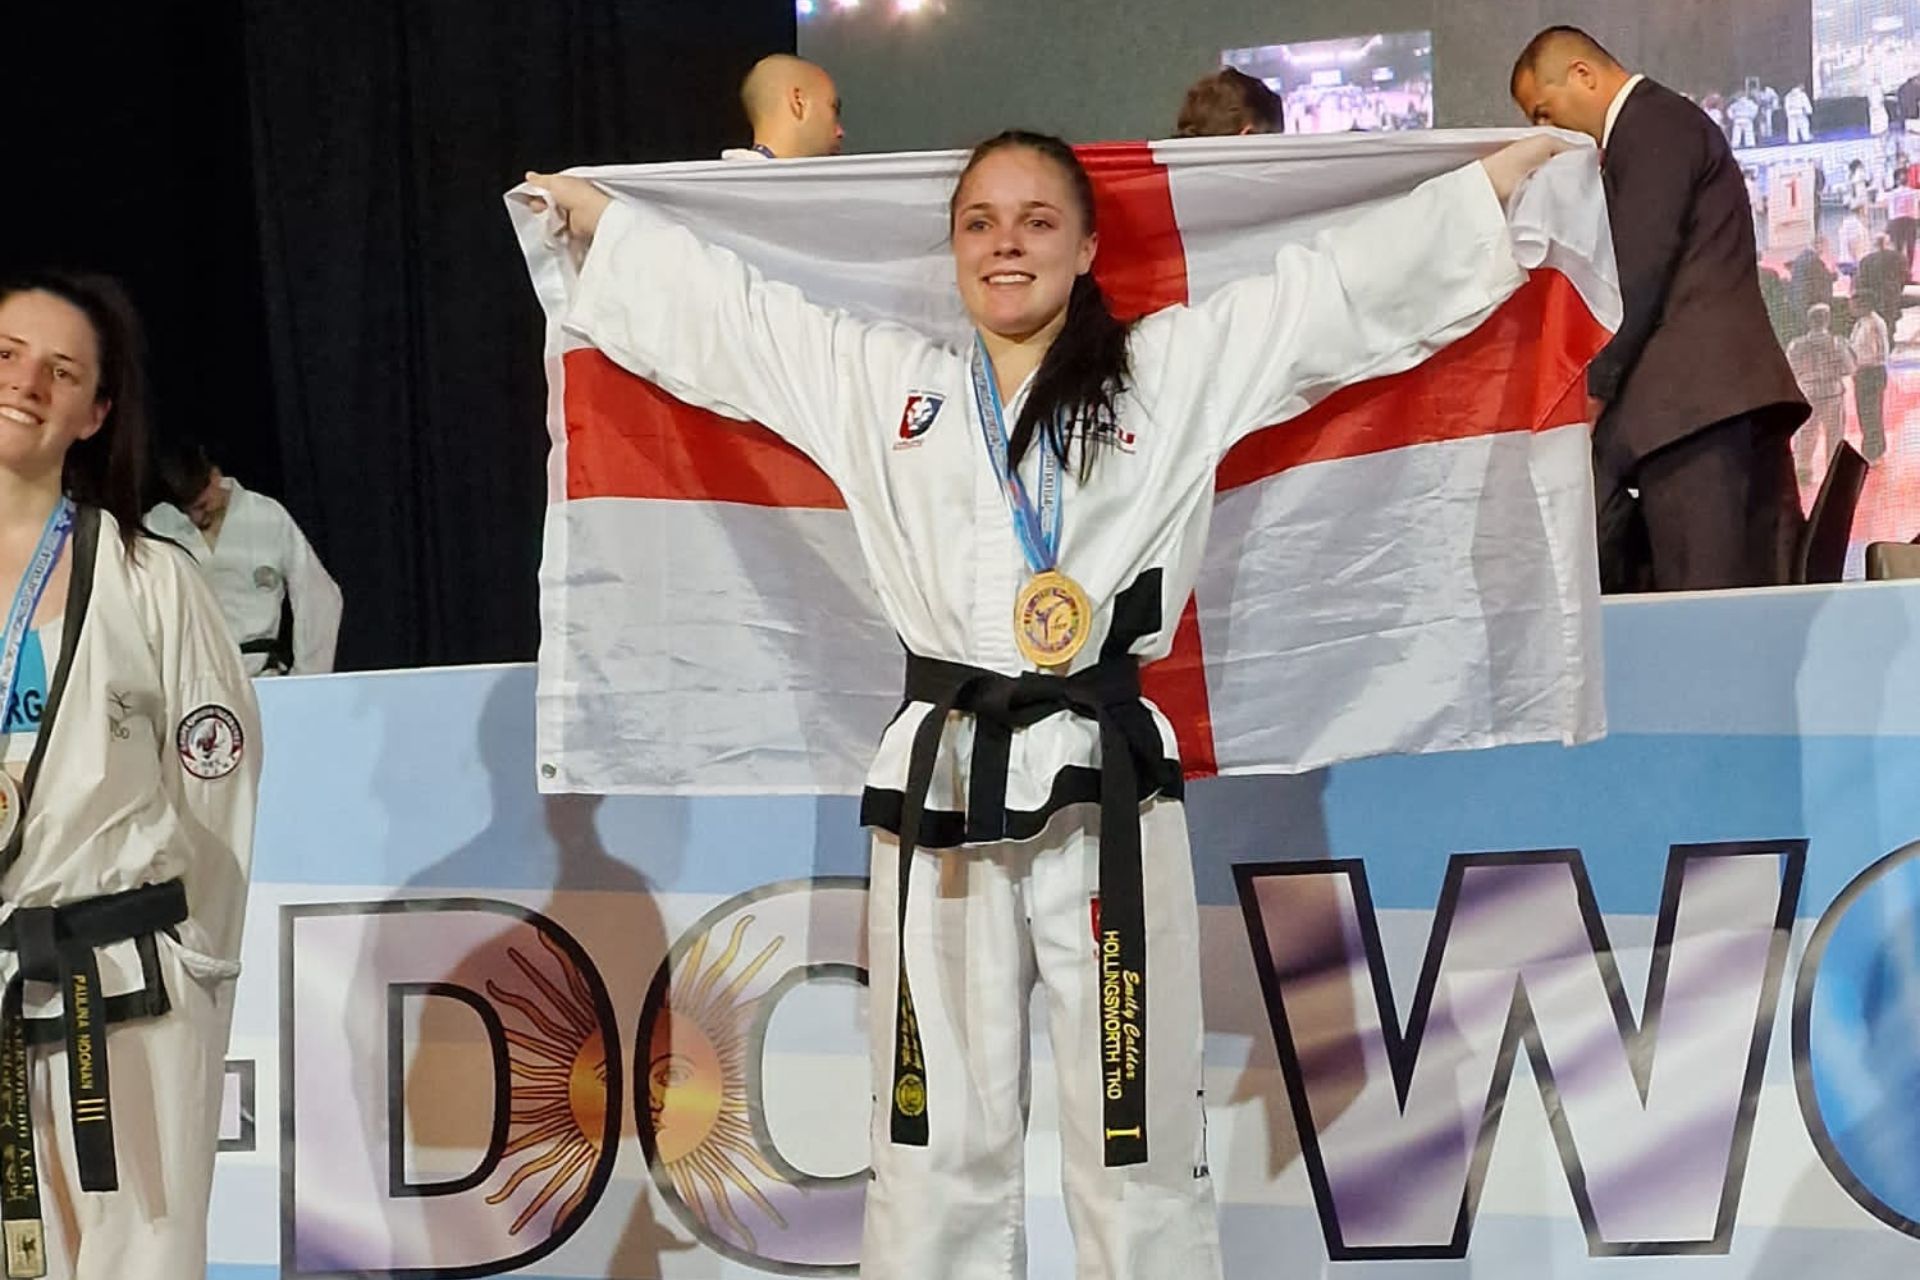 Student Emily wearing gold medal holding England flag